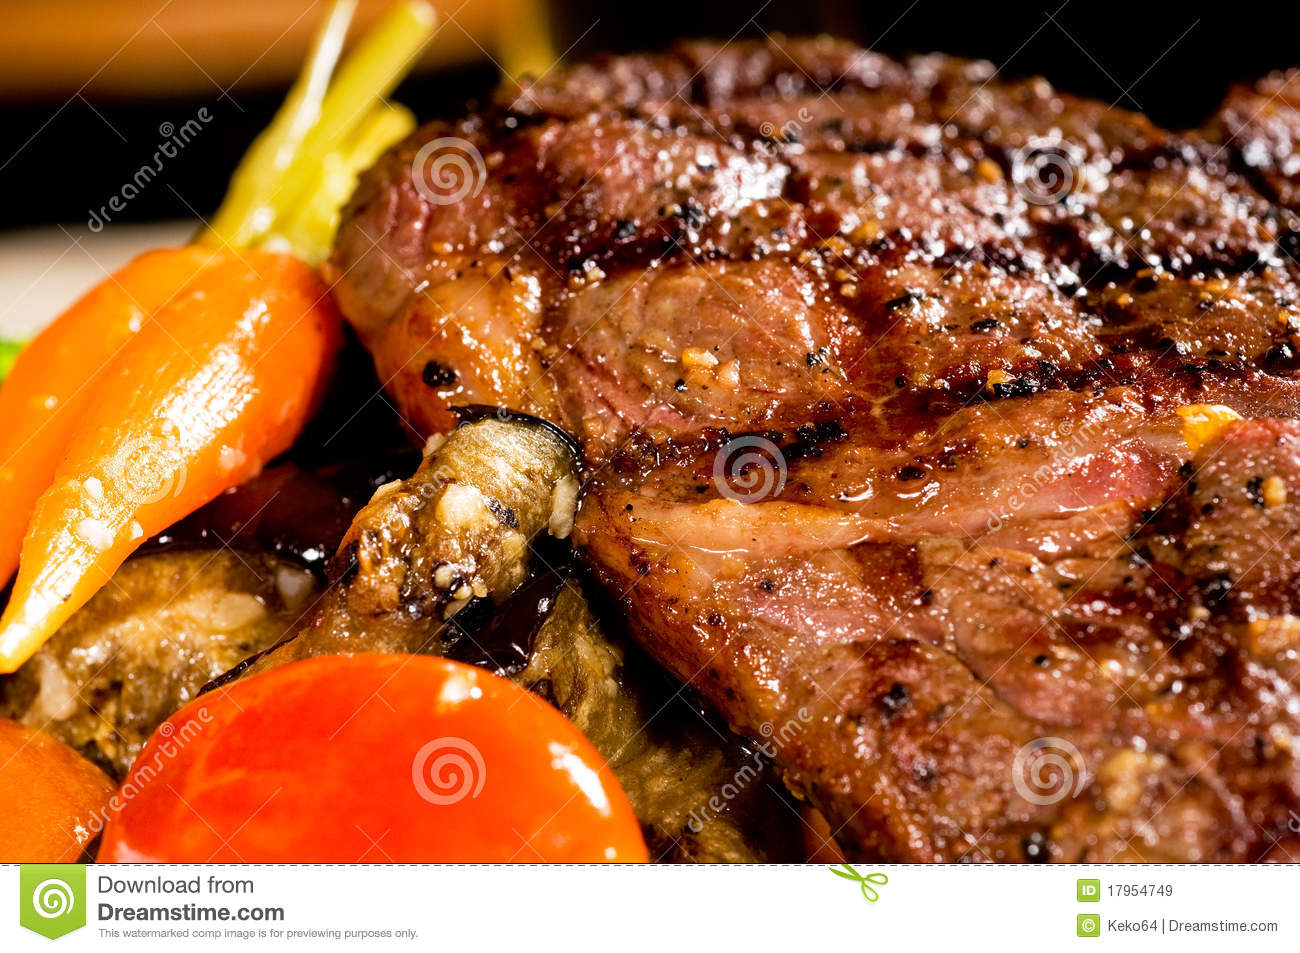 Fresh Grilled Ribeye Steak With Broccolicarrot And Cherry Tomatoes On